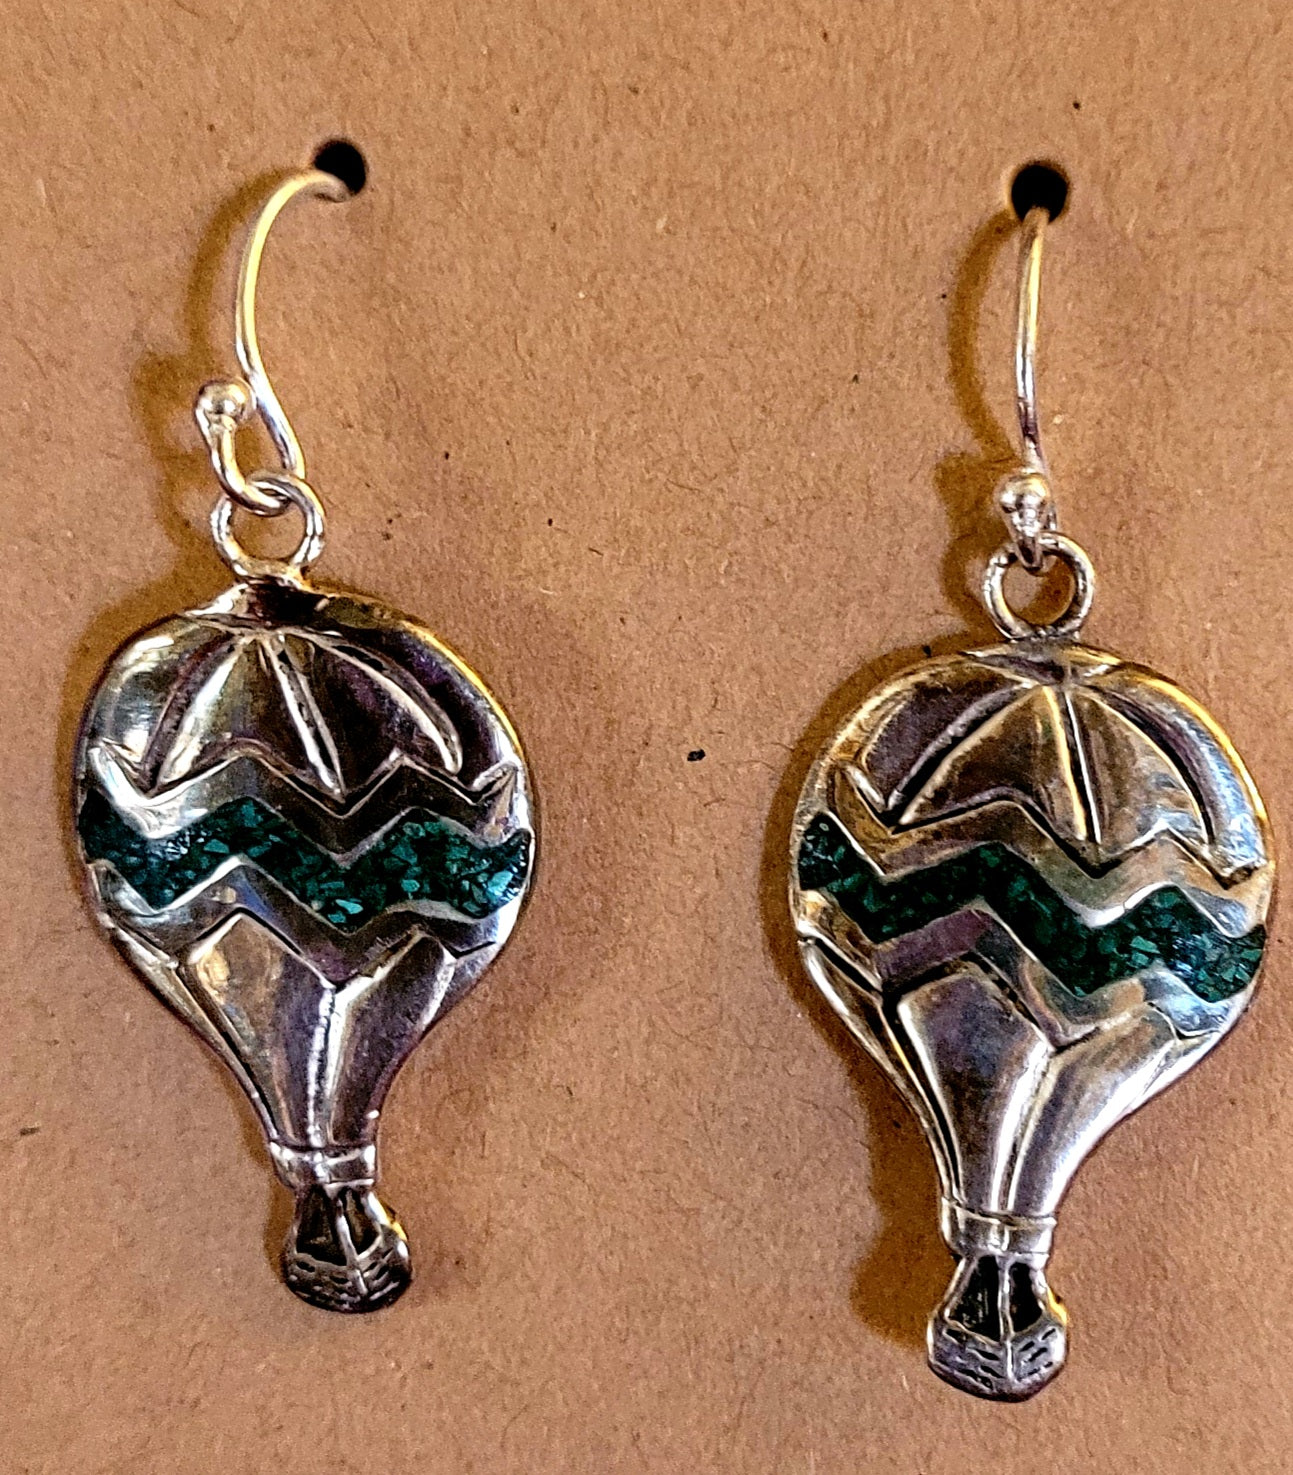 Hot Air Balloon ~ BRAND NEW Sterling Silver & Turquoise Earrings